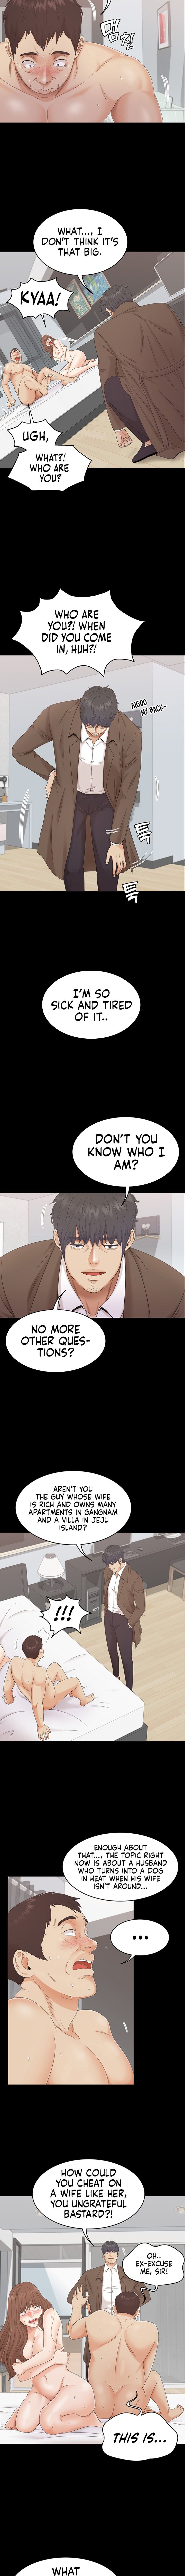 stuck-in-time-chap-2-11